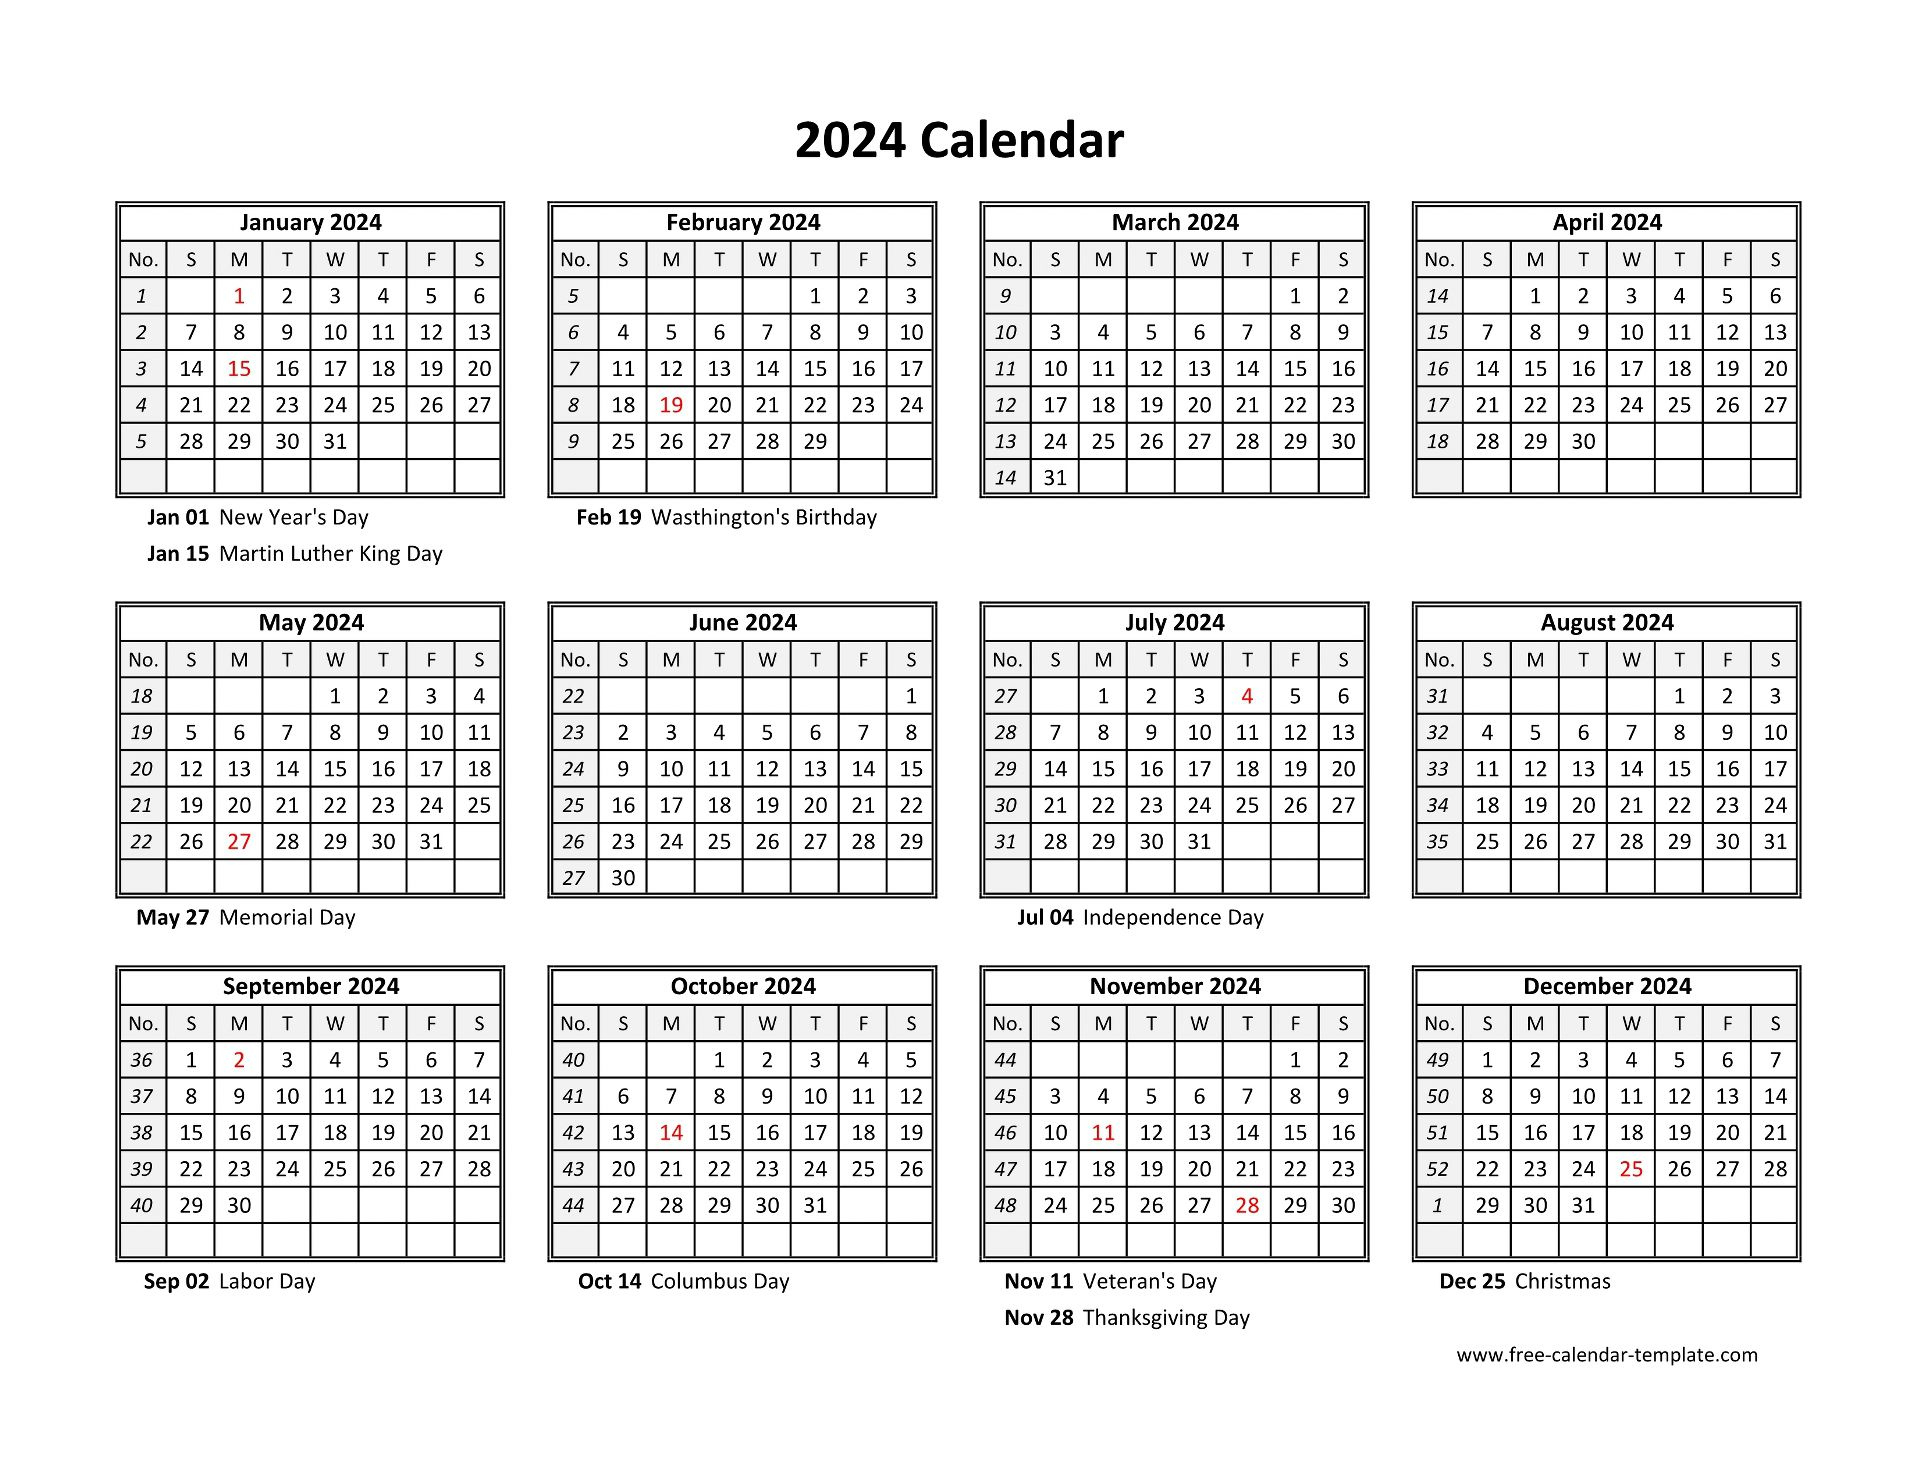 Yearly Calendar 2024 Printable With Federal Holidays | Free |  Calendar 2024